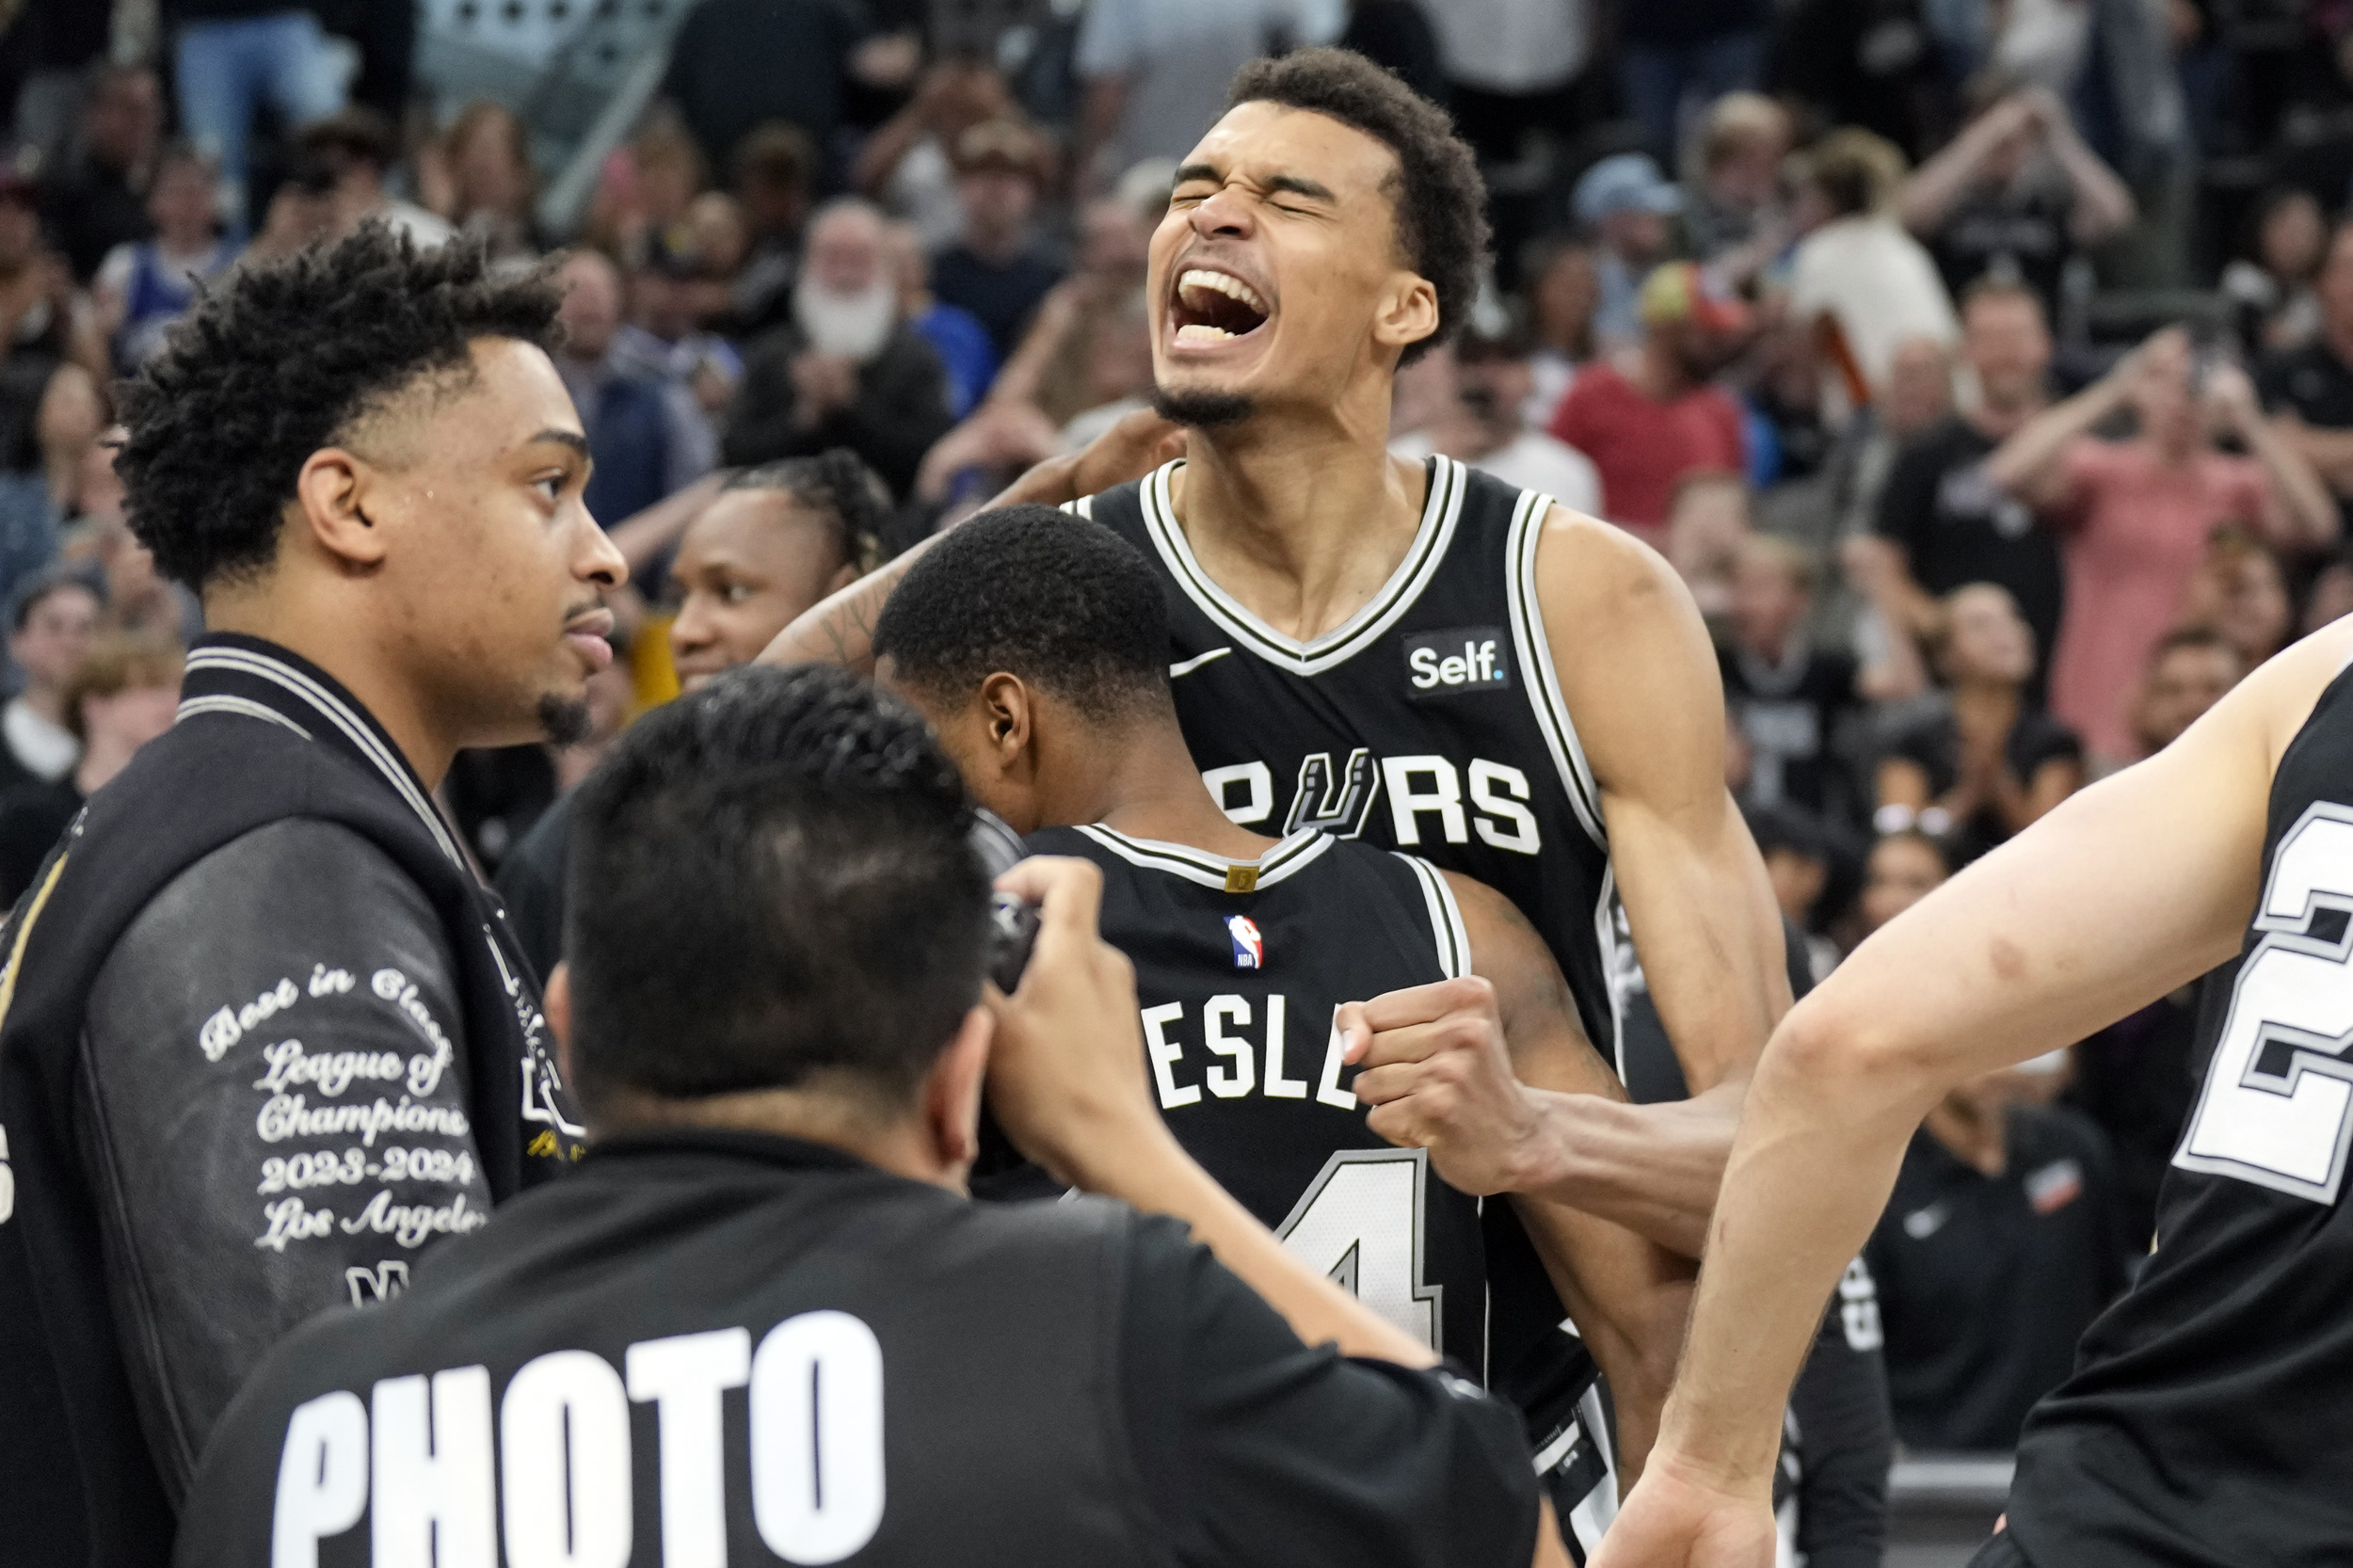 spurs’ wild comeback leads to 3-way tie for first in western conference standings